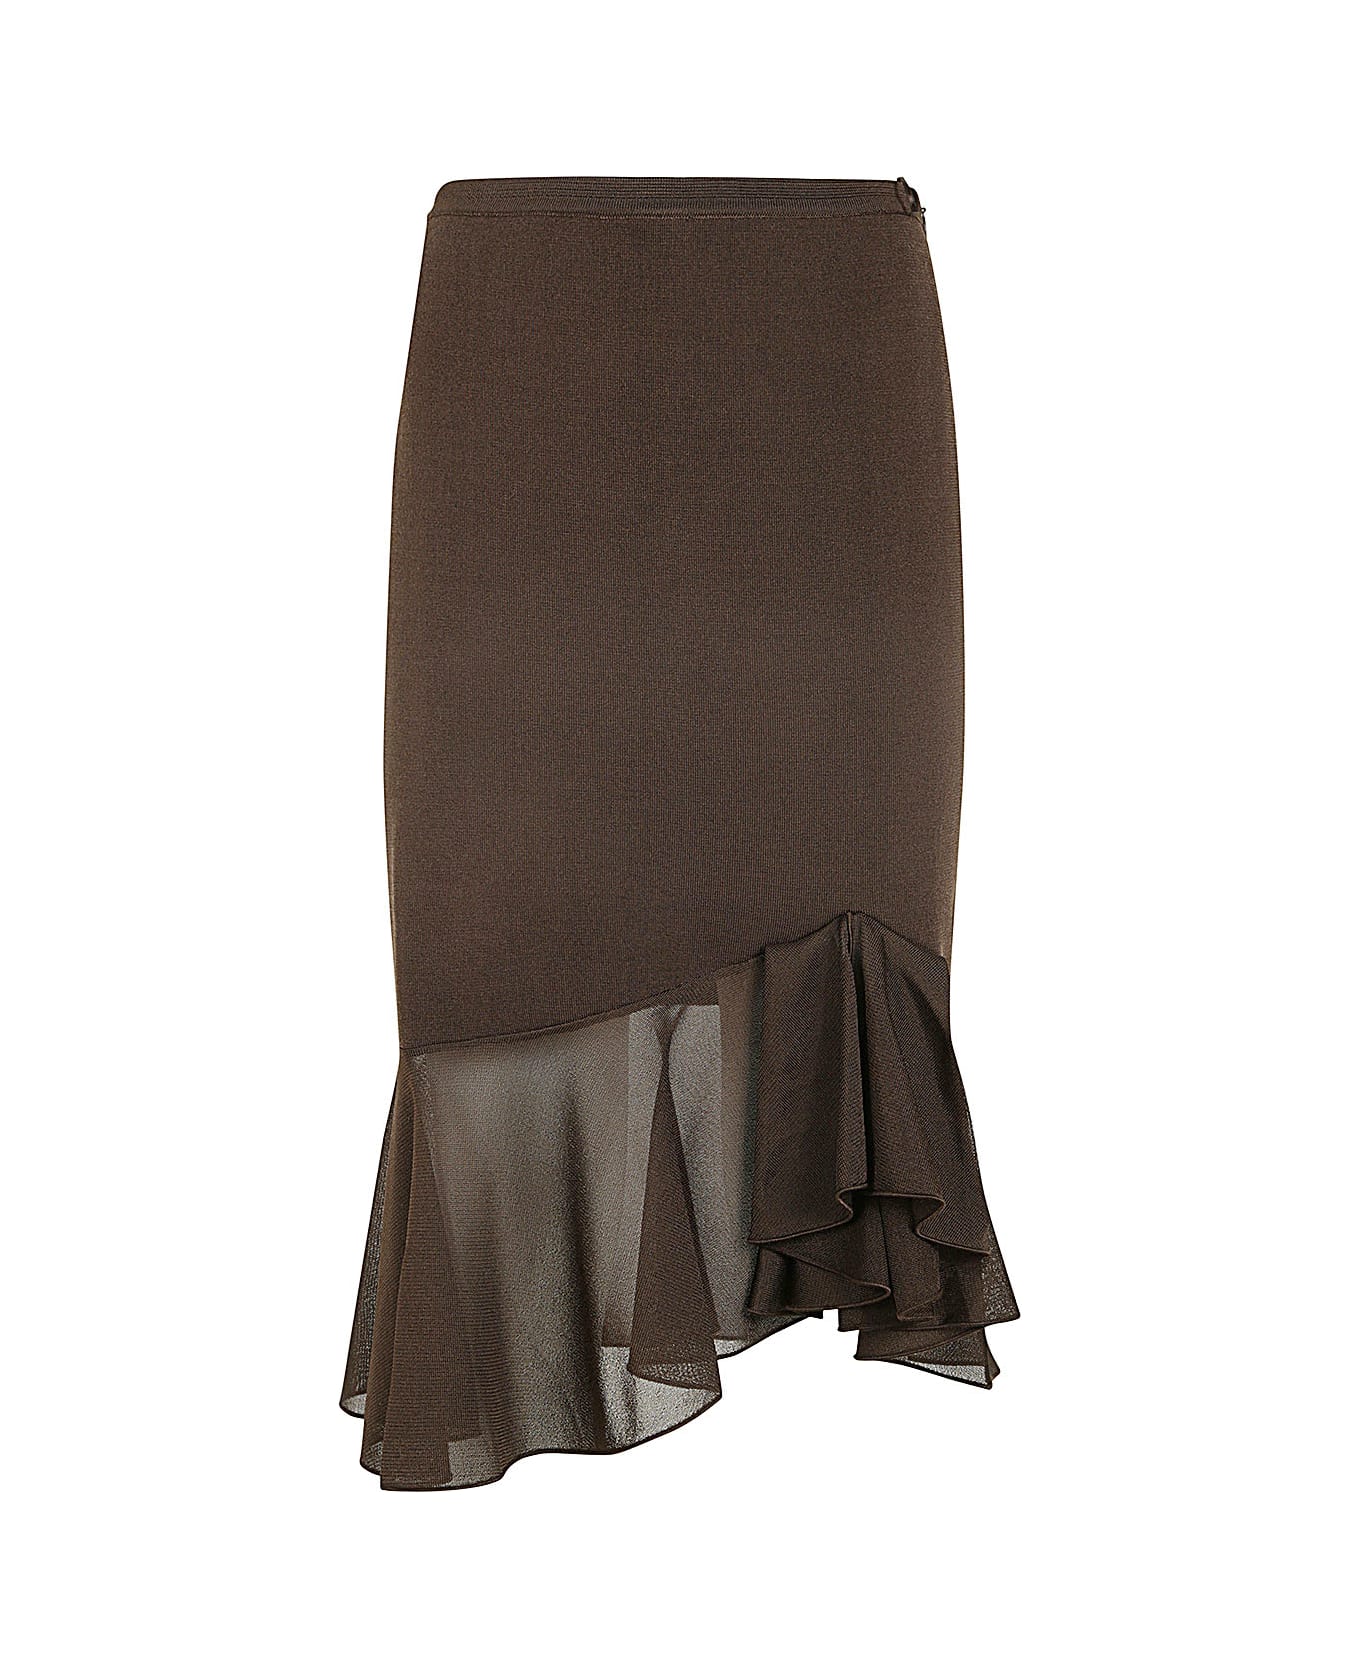 Tom Ford Knitted Skirt - Chocolate Brown スカート